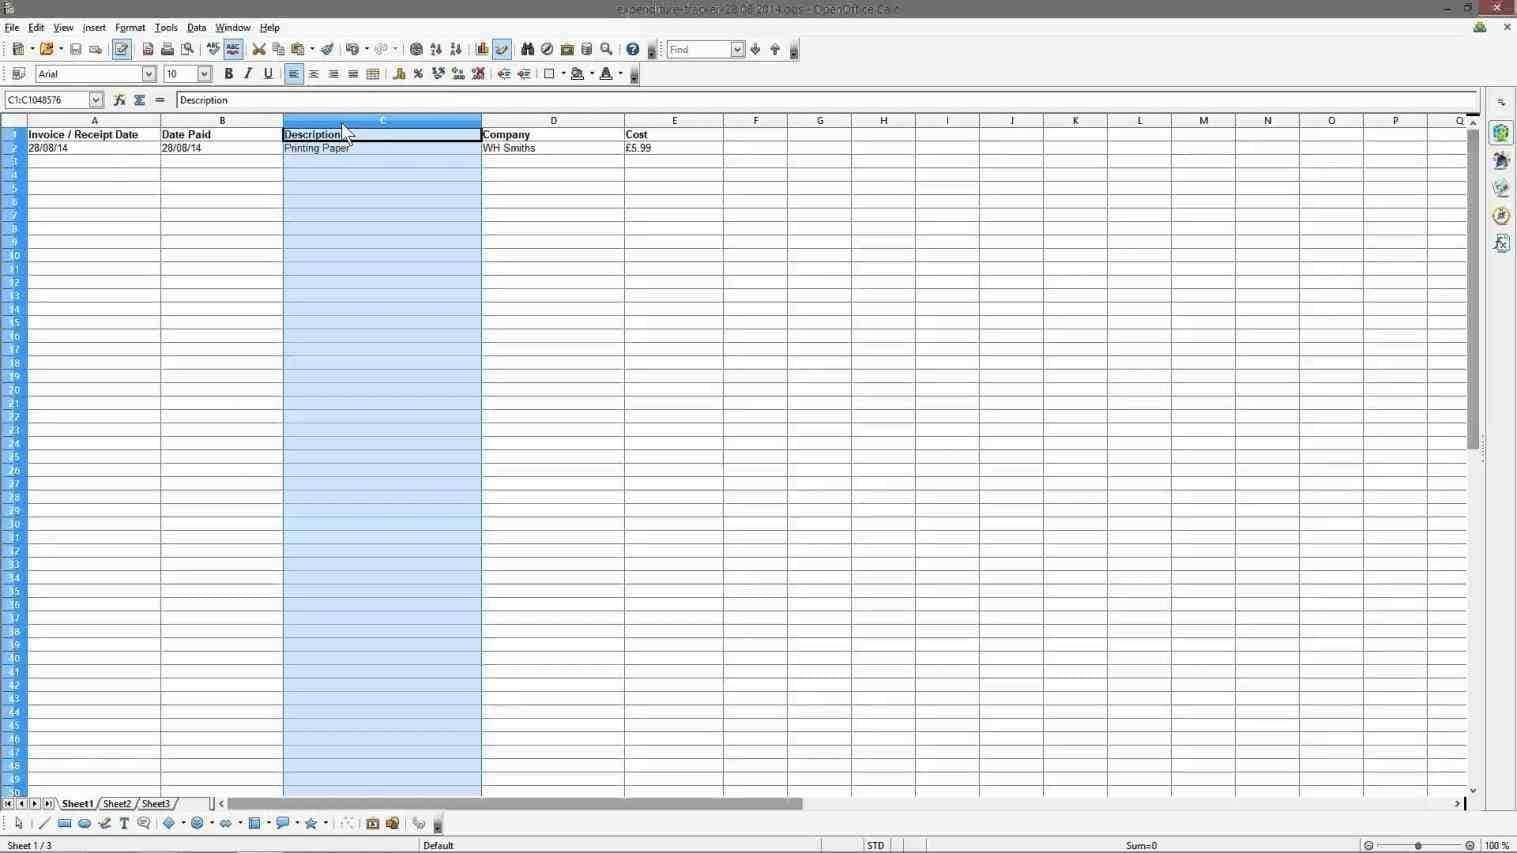 Daily Fuel Inventory Spreadsheet For Daily Fuel Inventory Spreadsheet  Pulpedagogen Spreadsheet Template